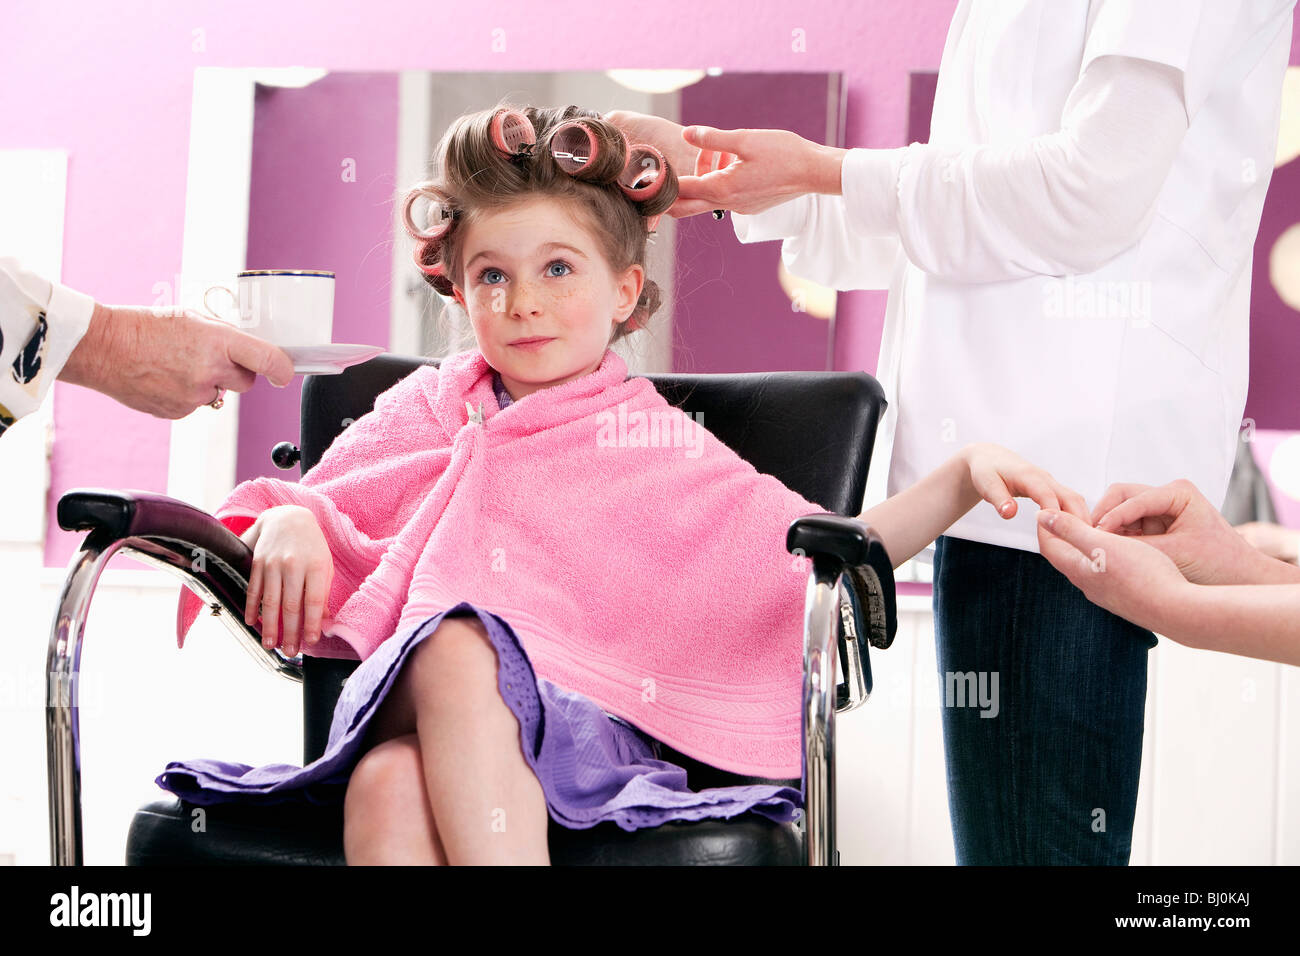 portrait of young girl at hair salon being served Stock Photo